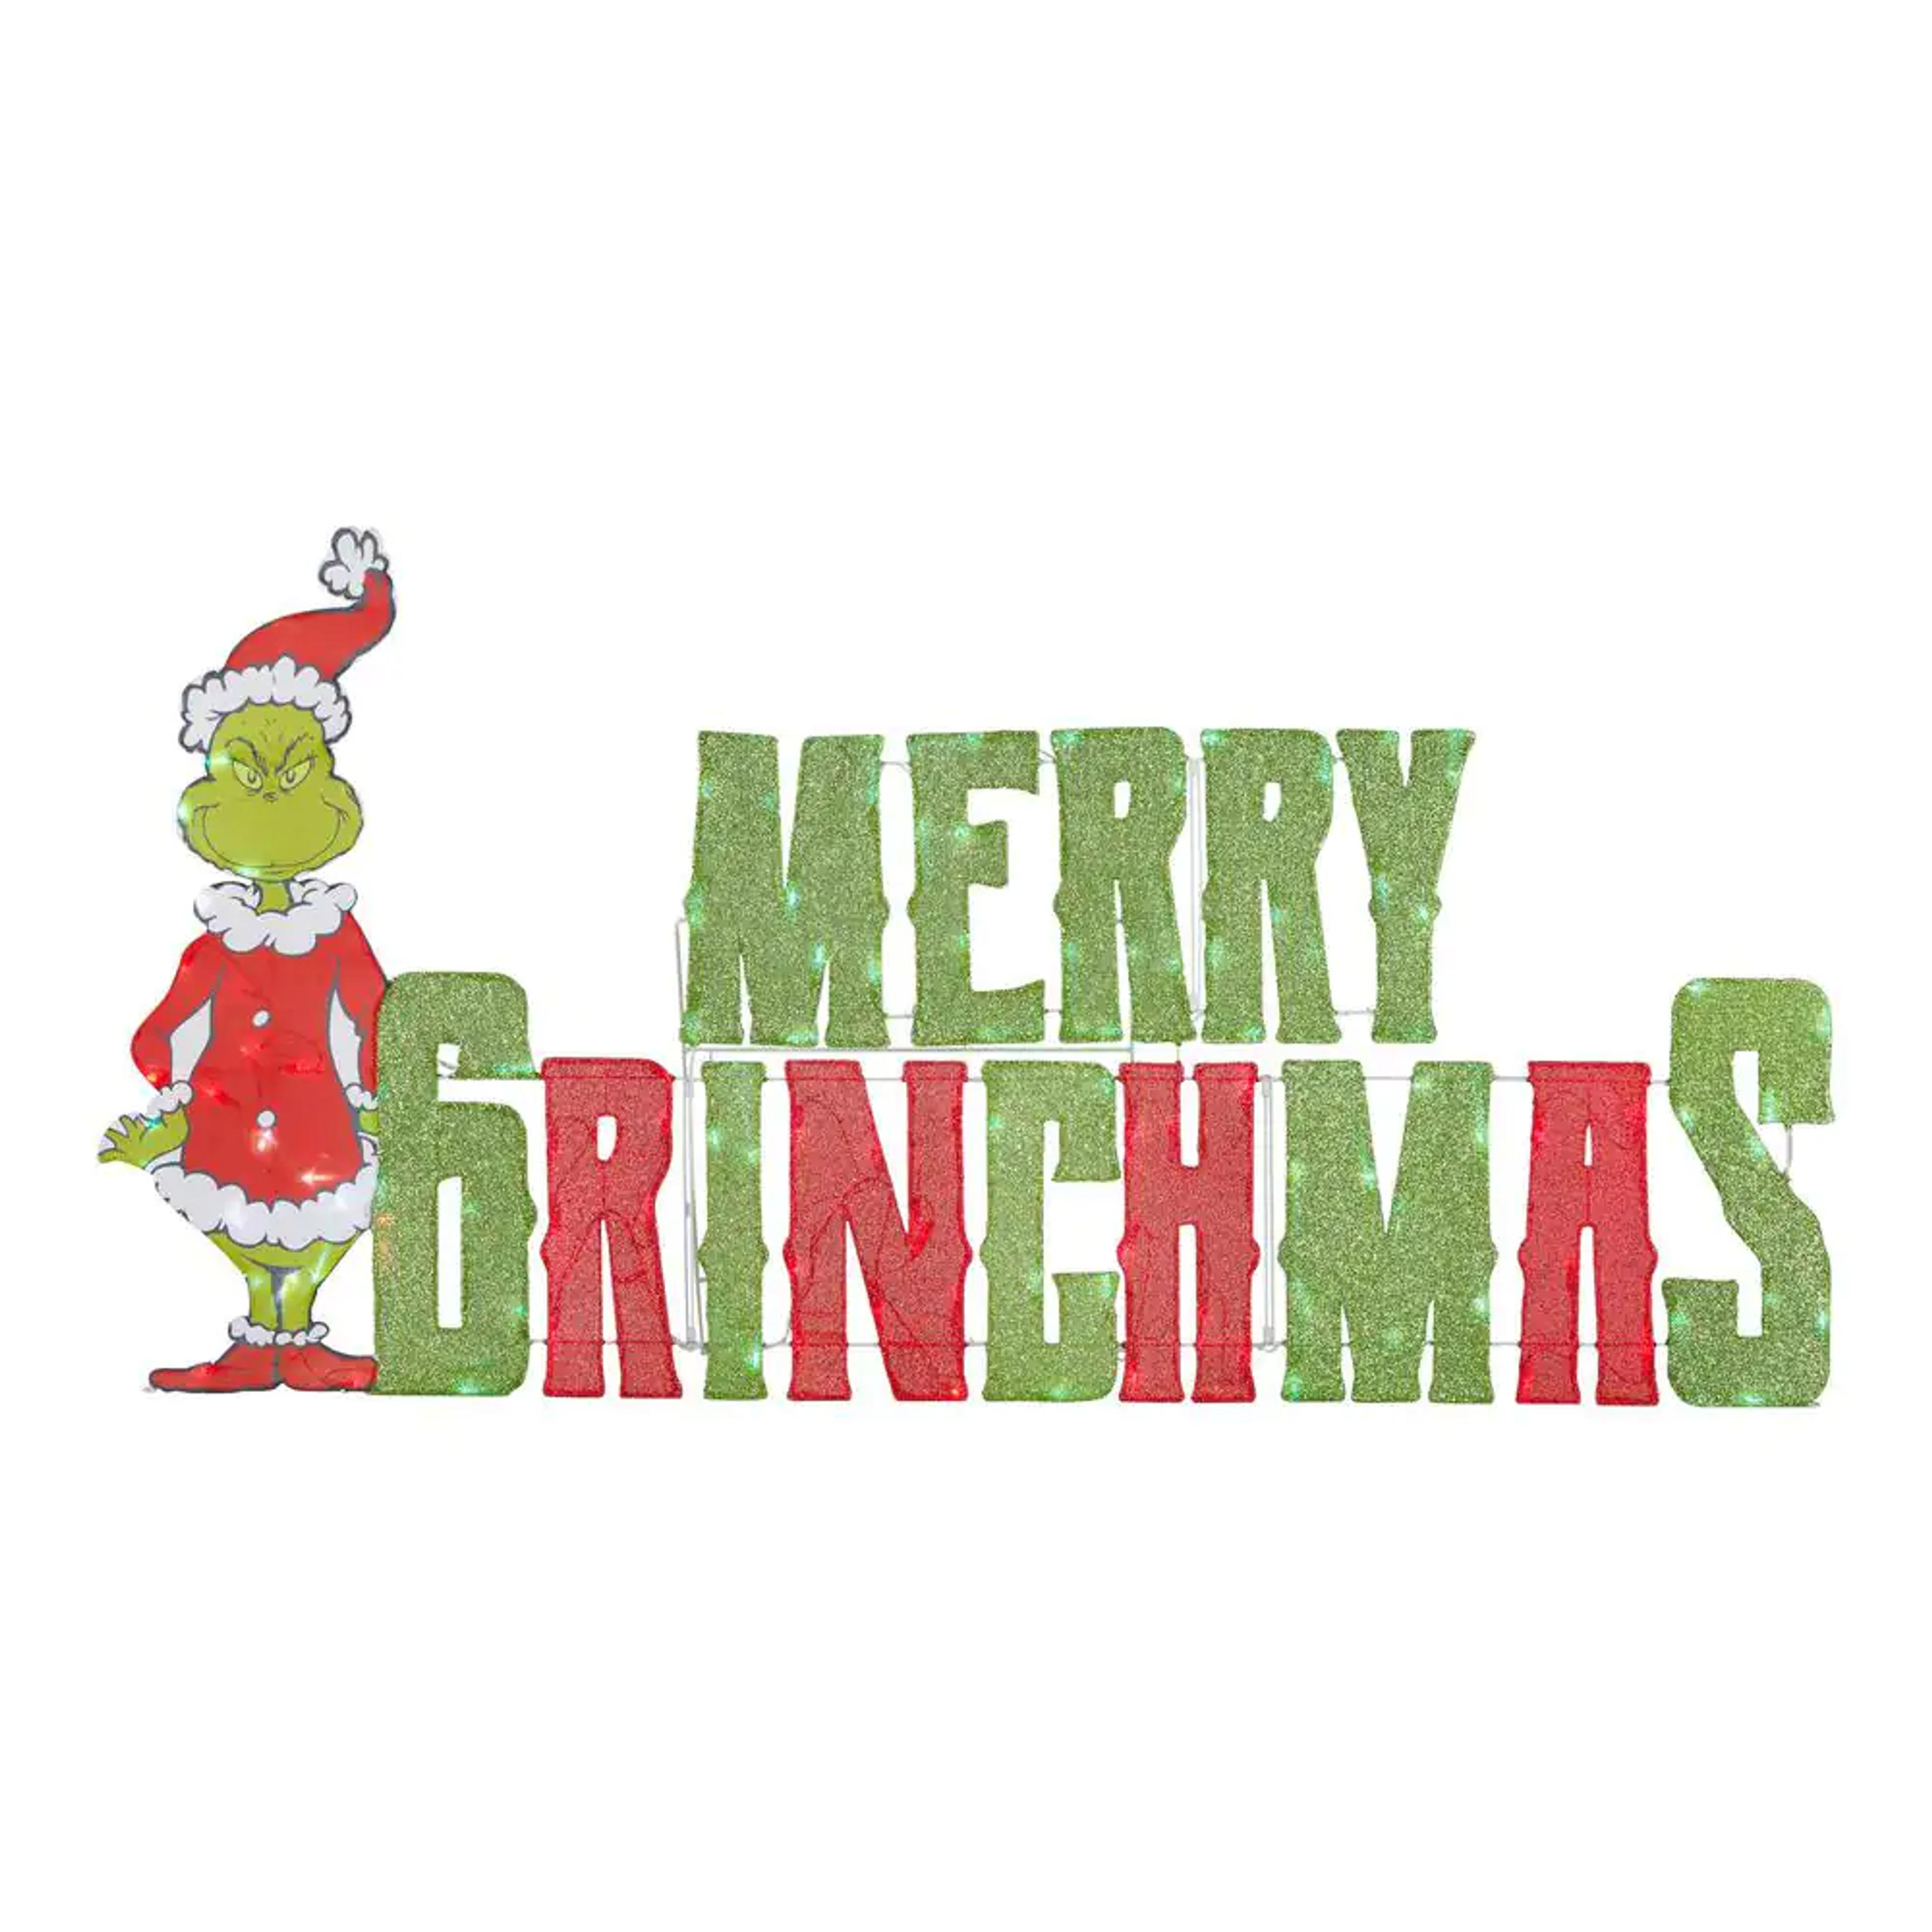 Dr. Seuss 6 ft LED Merry Grinchmas Sign Holiday Yard Decoration 21GM11640 - The Home Depot